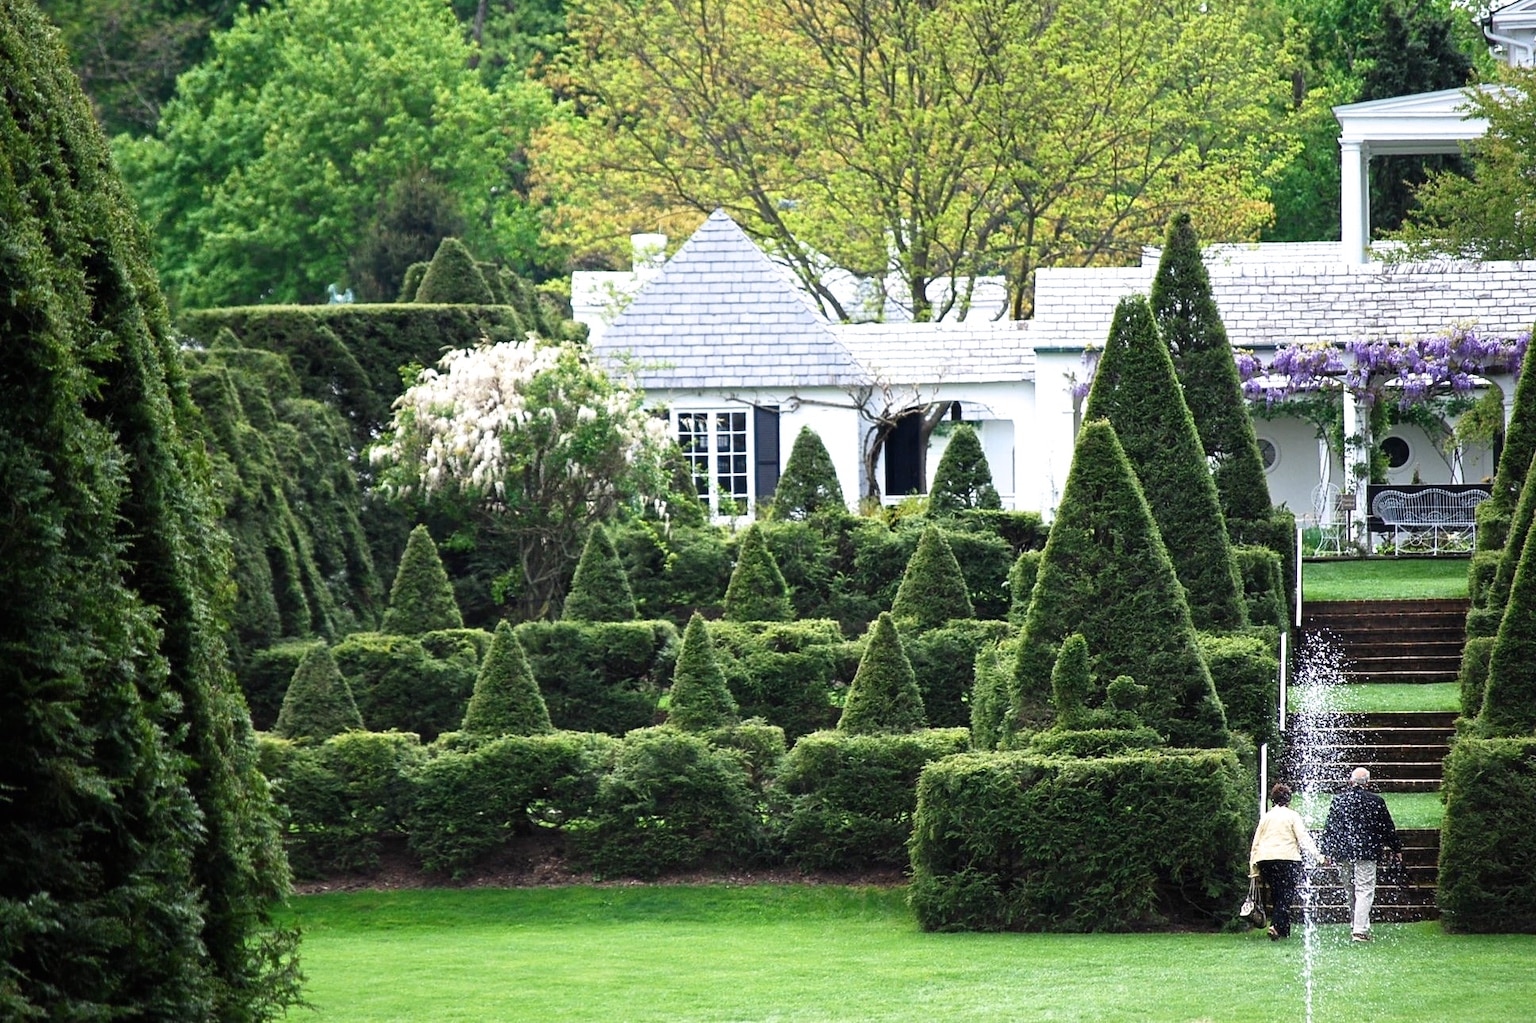 Ladew Topiary Gardens and Manor House